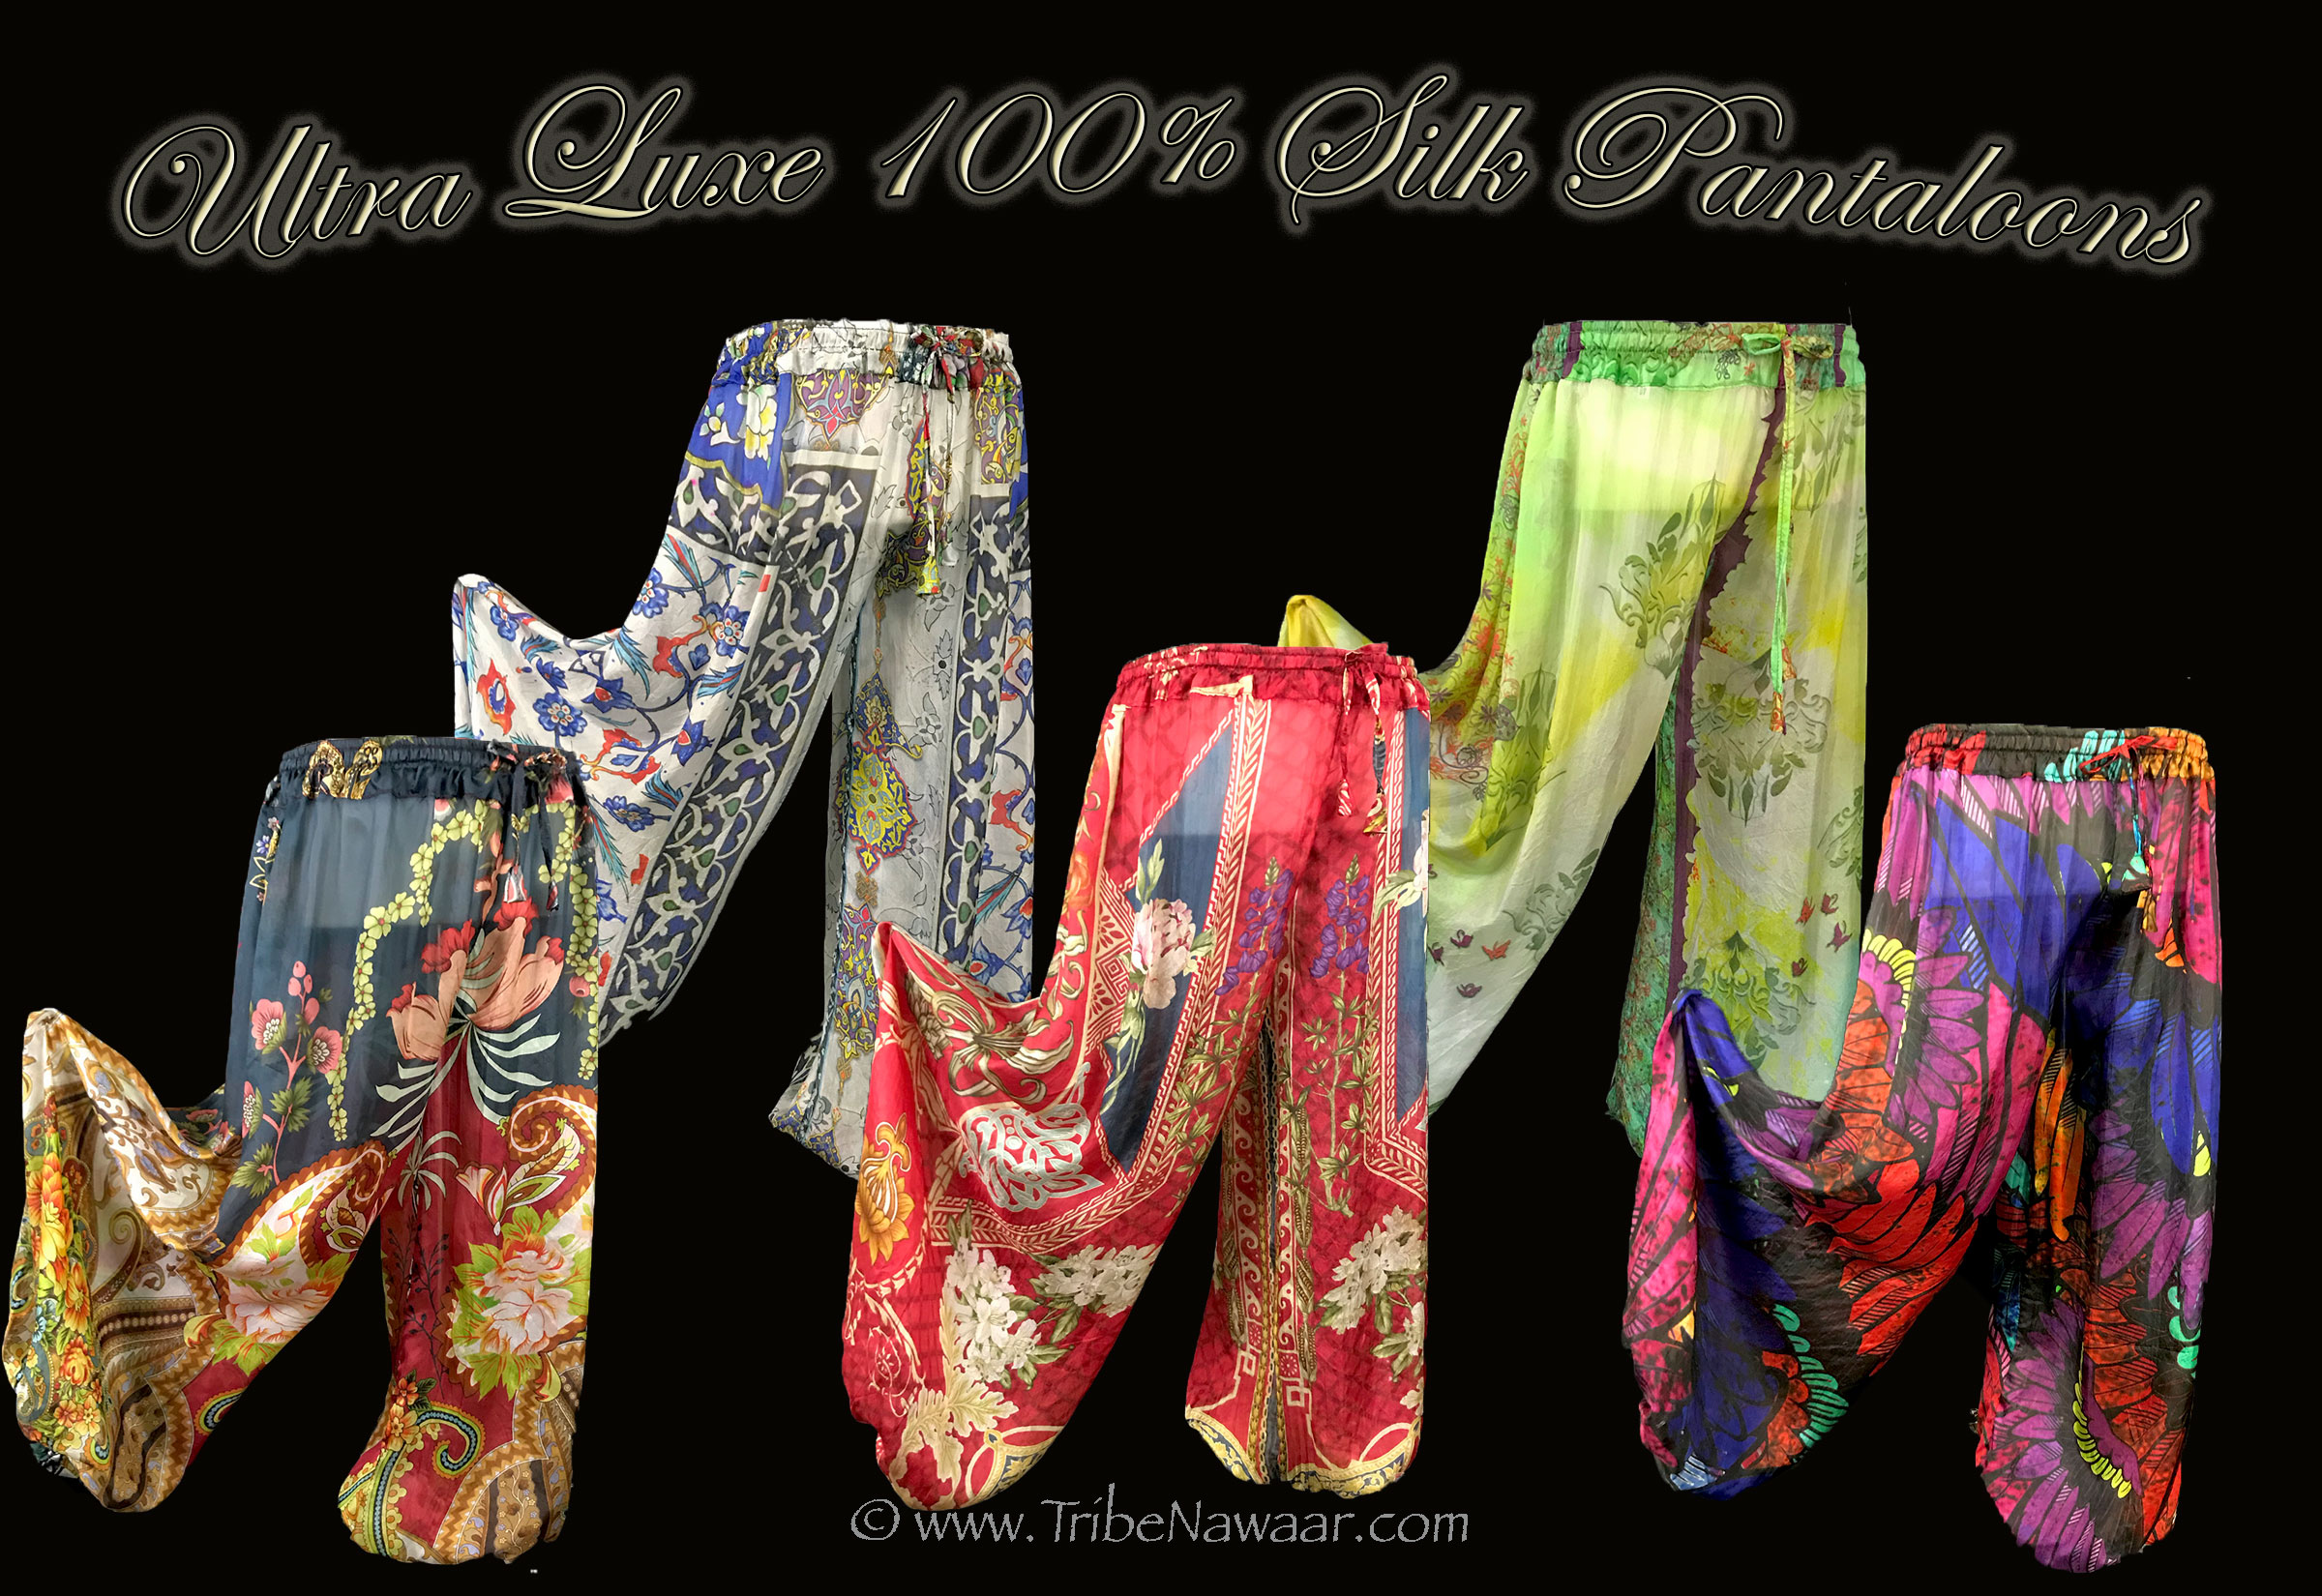 Ultra luxe 100% silk pantaloons available at Tribe Nawaar